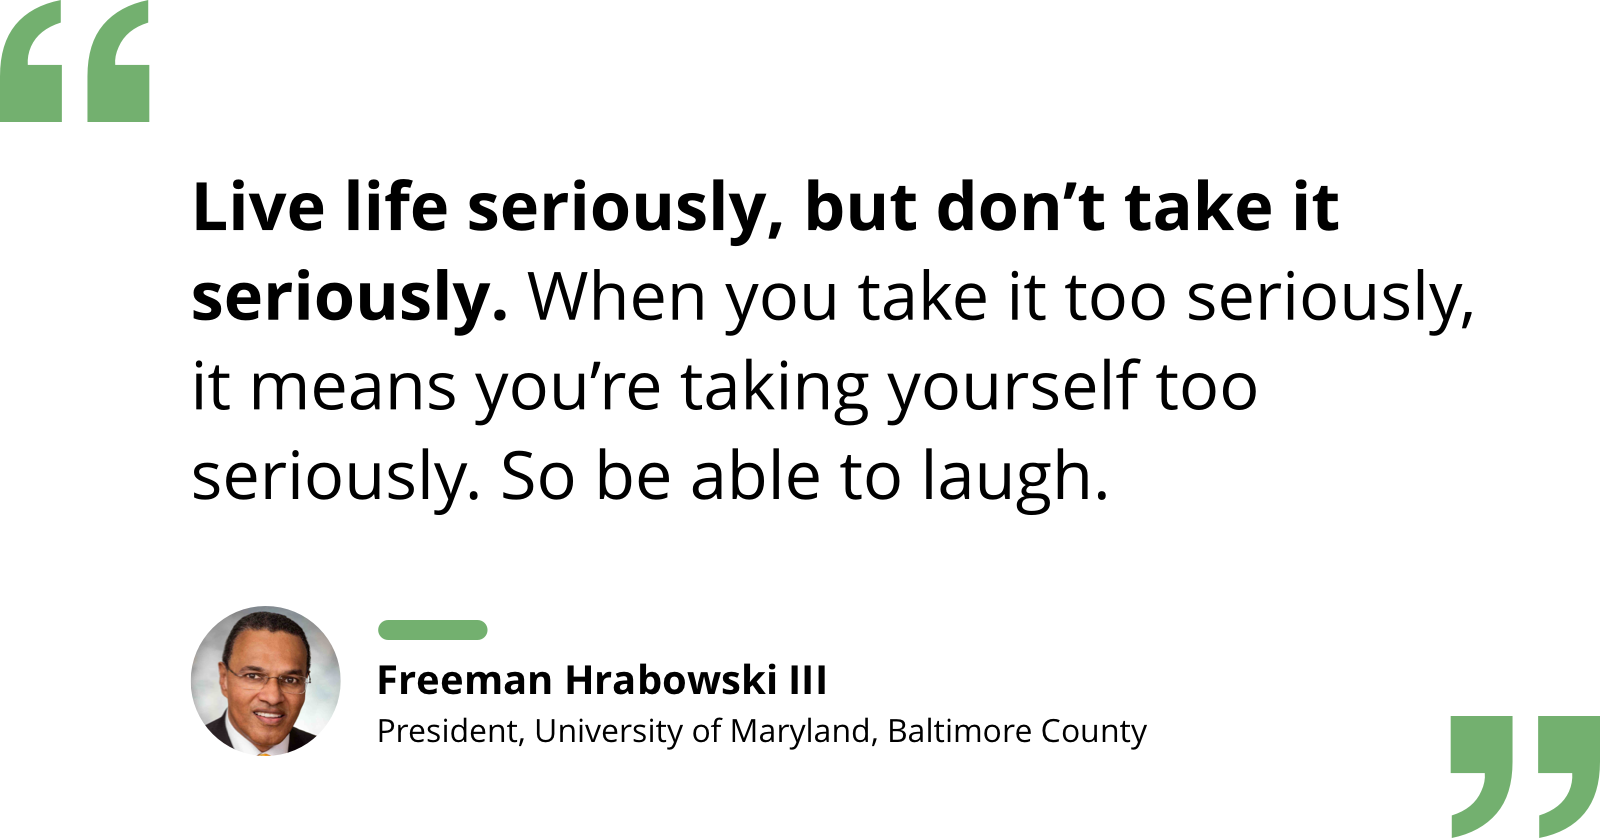 Quote by Freeman Hrabowski re: taking life seriously while still being able to laugh.